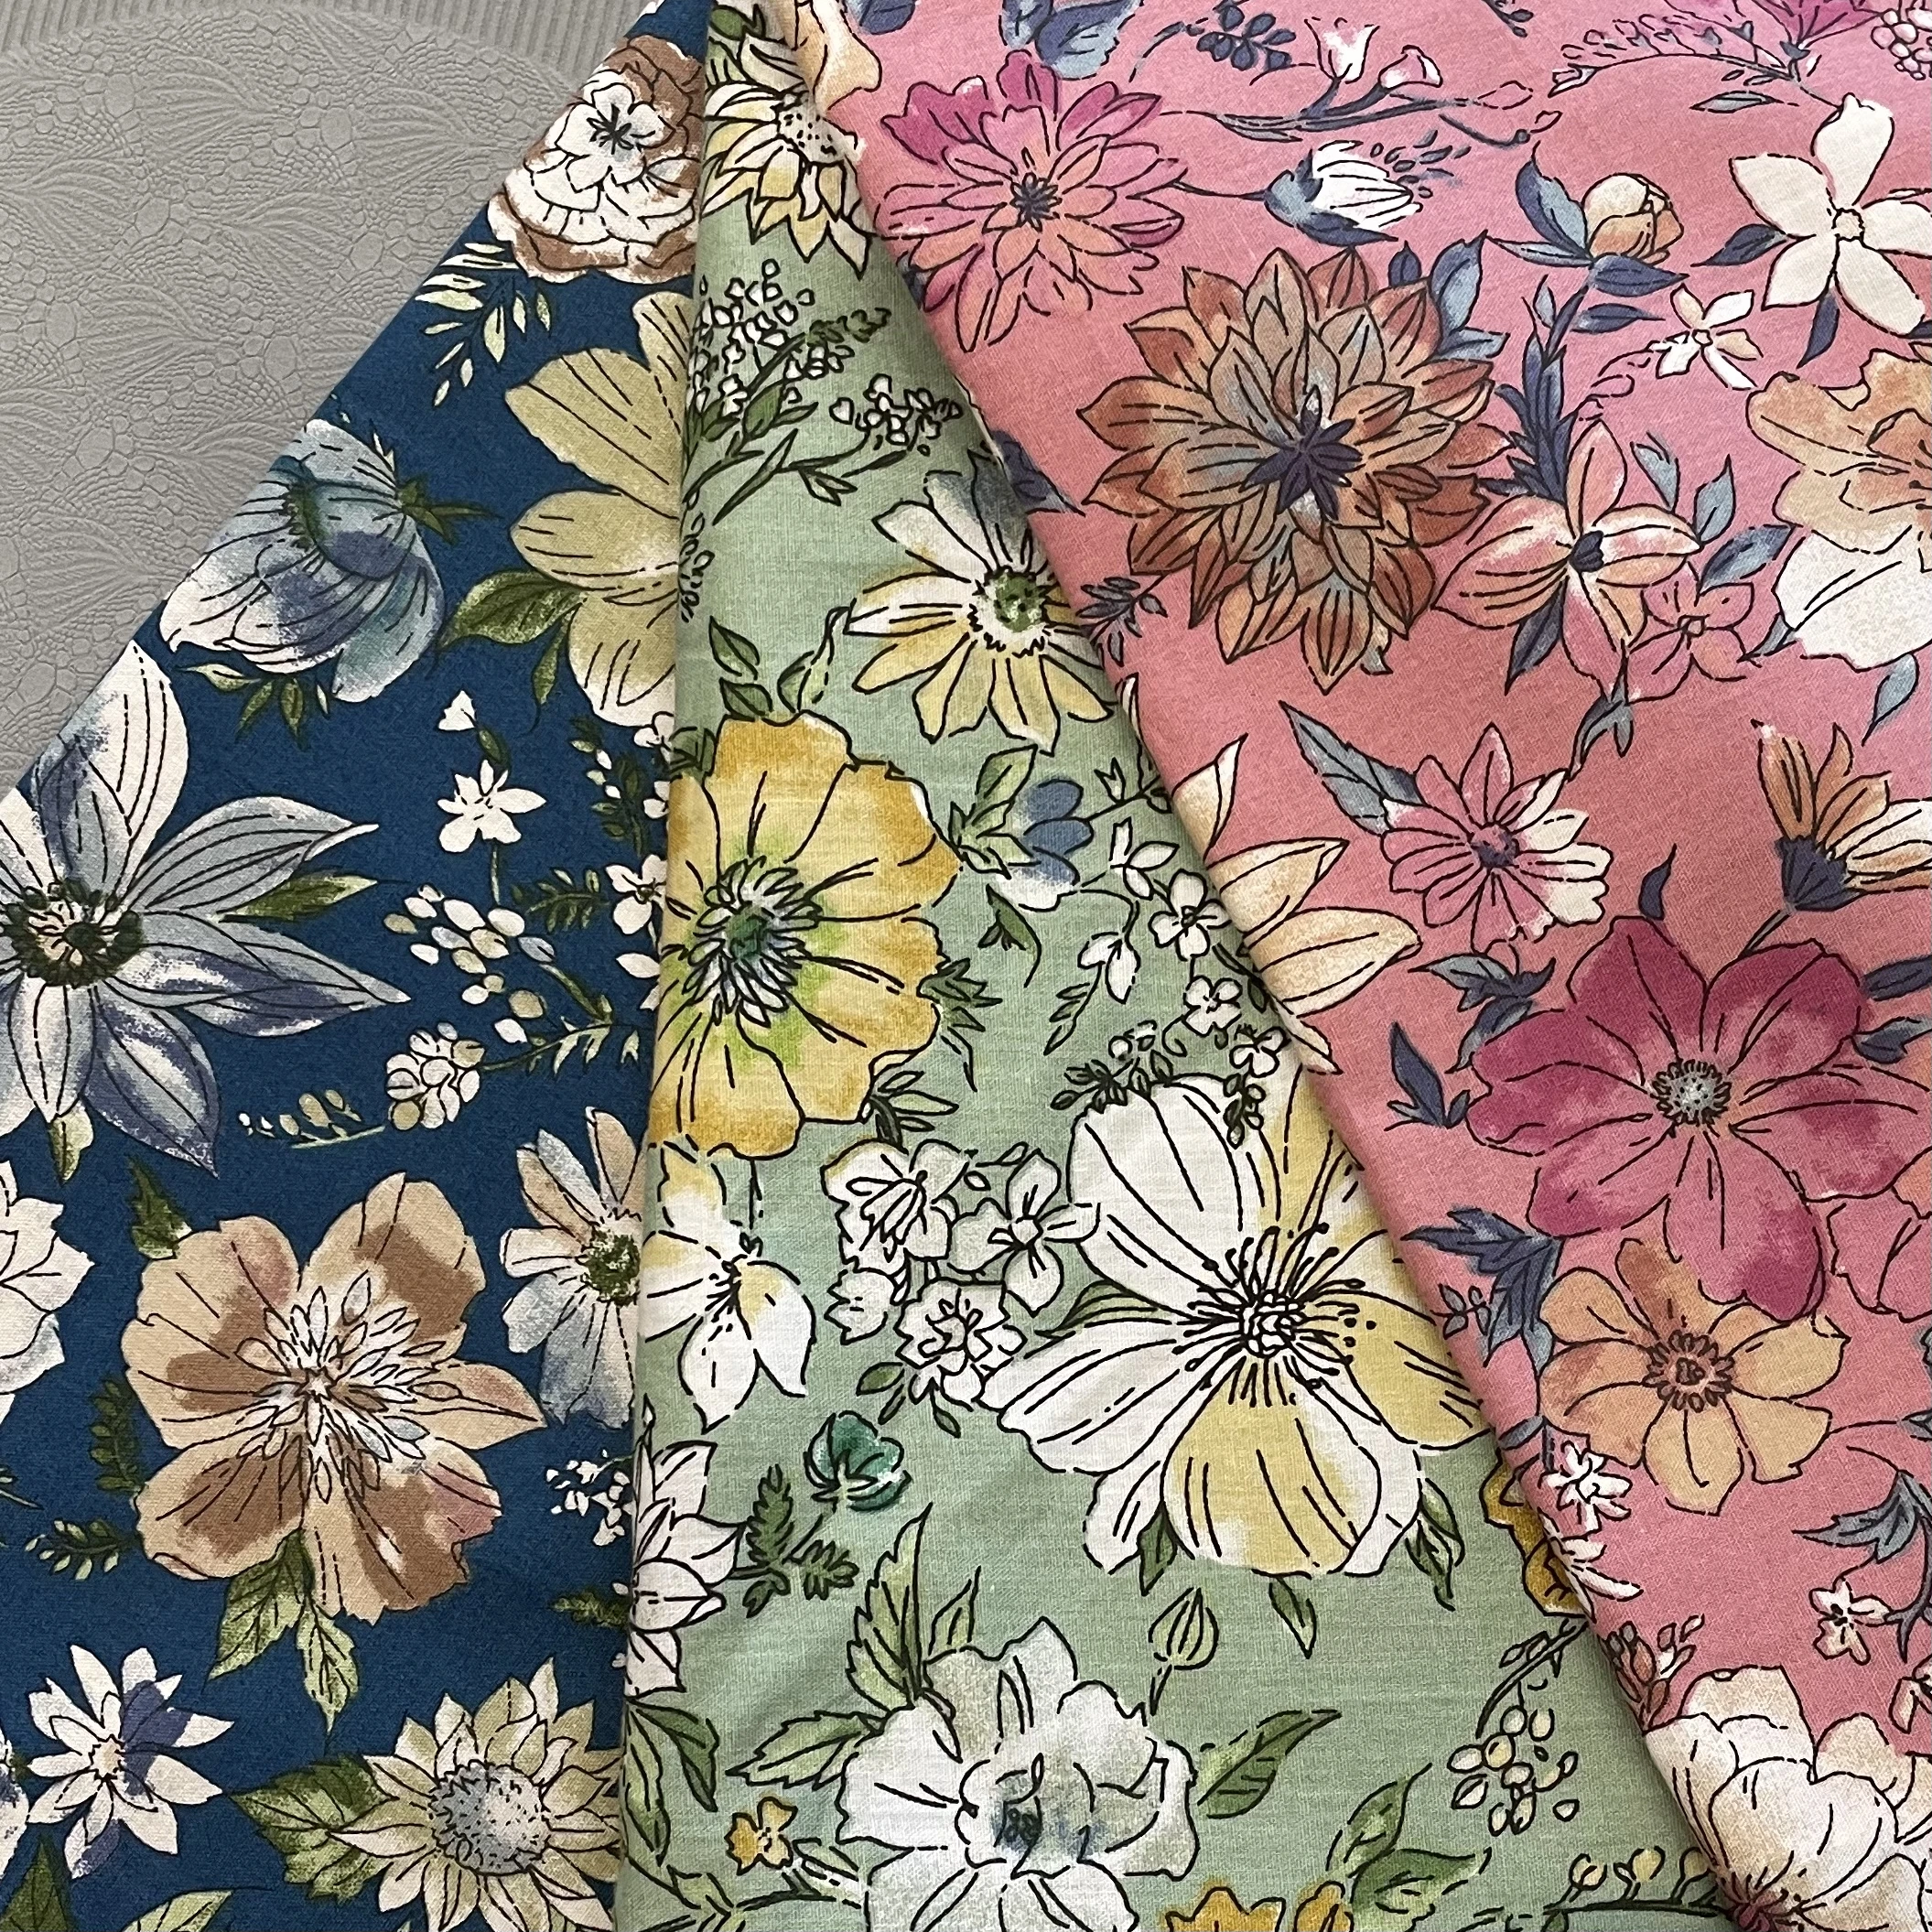 retro floral 40s tissun liberty cotton fabric for kids baby sewing cloth dresses skirt diy handmade designer0 5meter 2021 national styl 40S Tissun Liberty Cotton Poplin Fabric For Kids Baby Sewing Cloth Dresses Skirt DIY Handmade Patchwork Meter